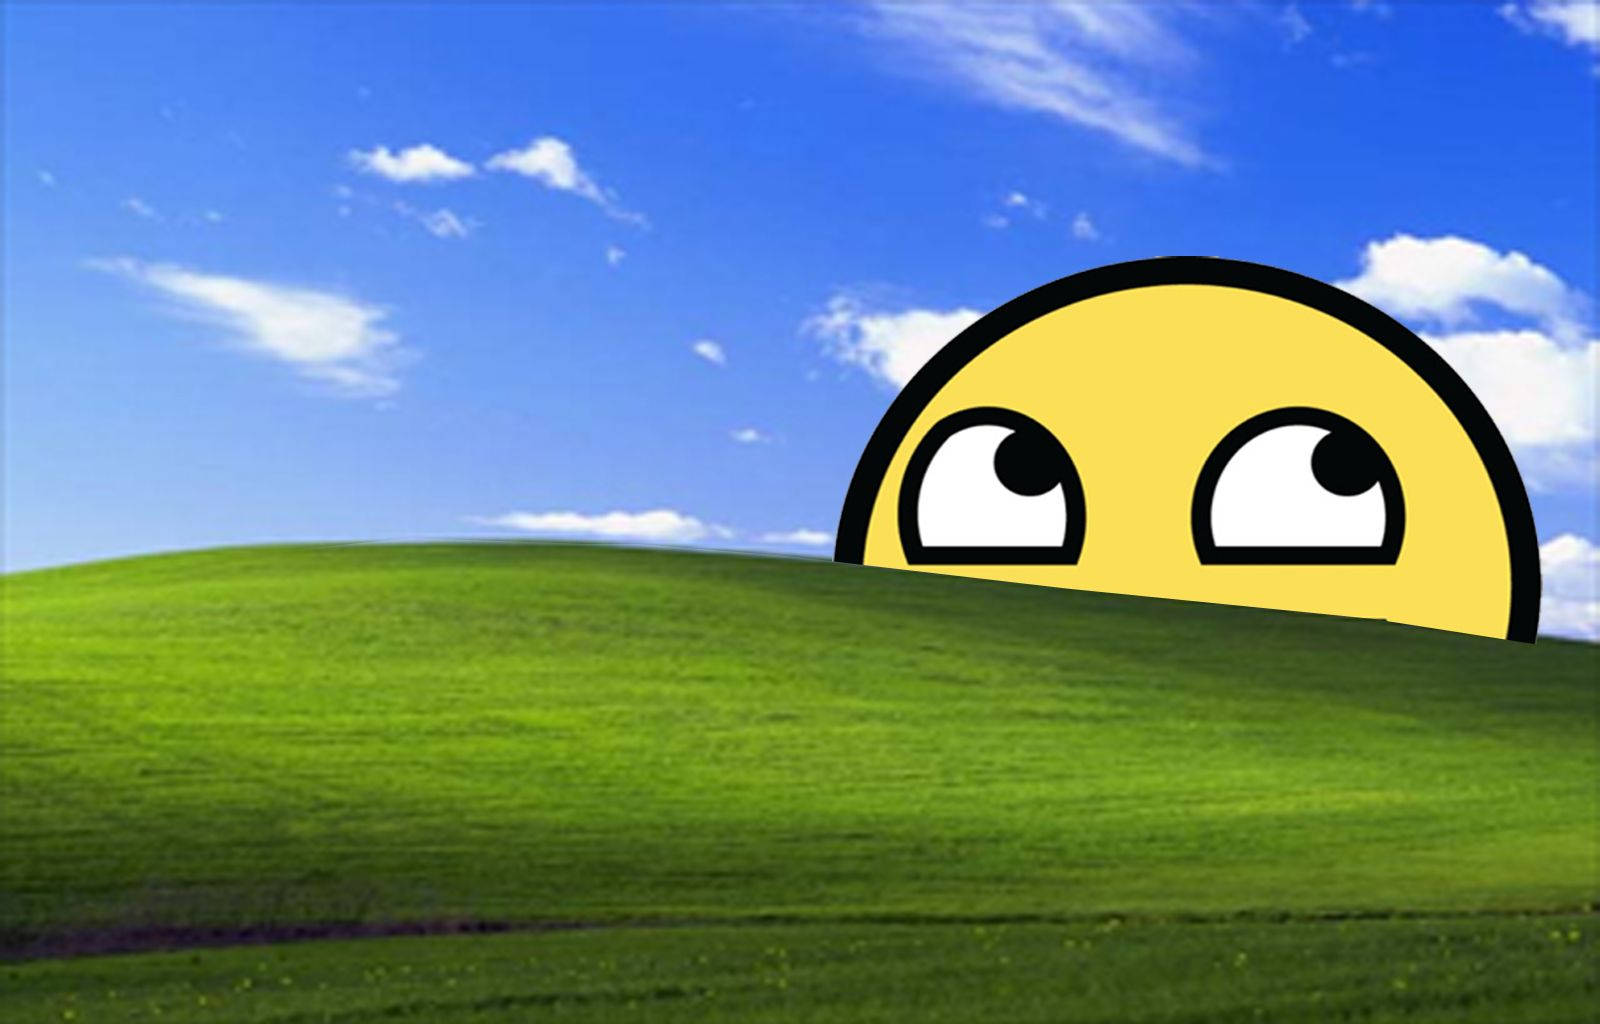 A Smiling Face Is Peeking Out Of A Green Field